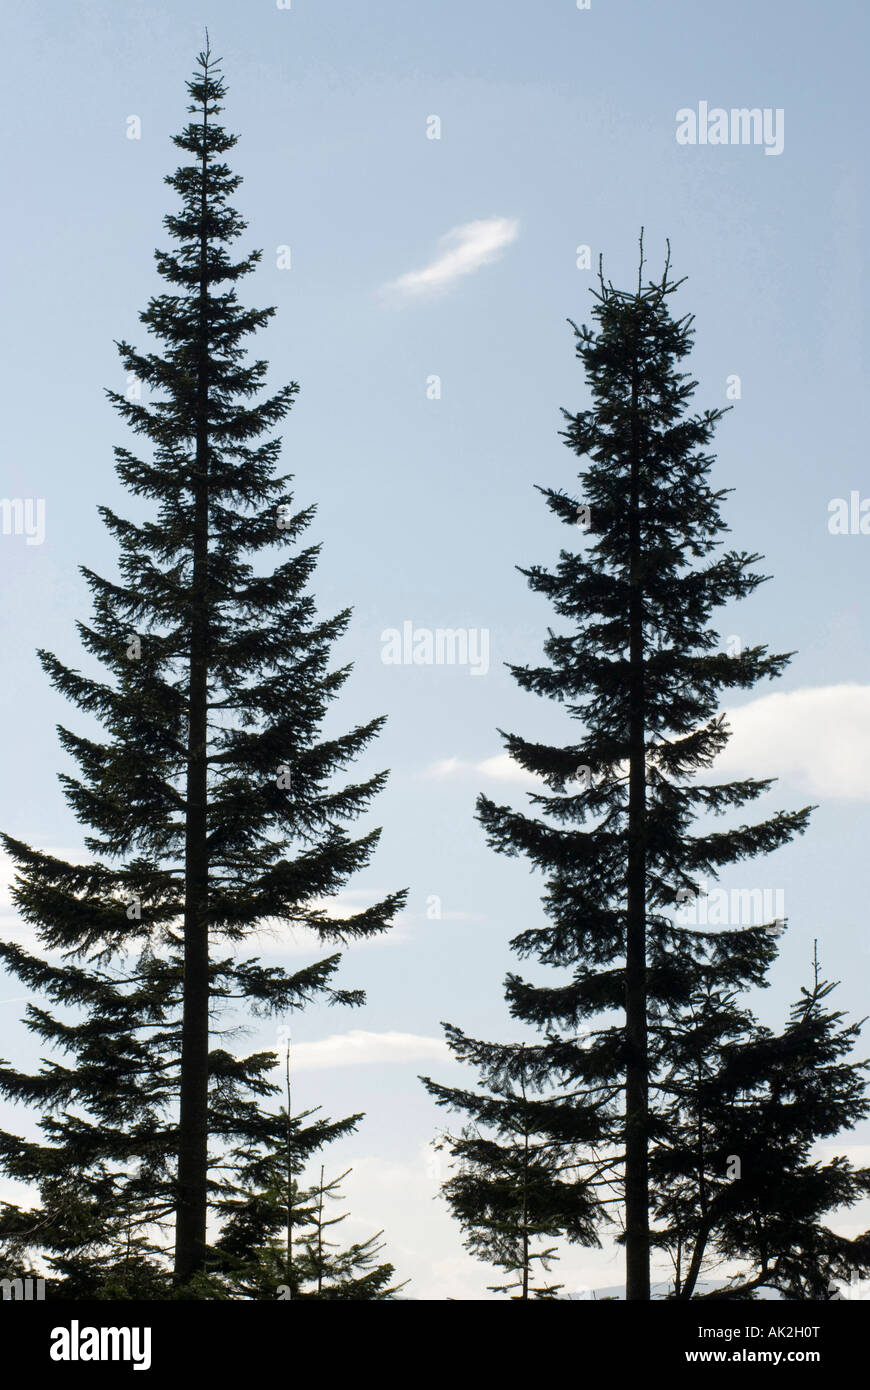 Two pine trees standing in a forest. Stock Photo